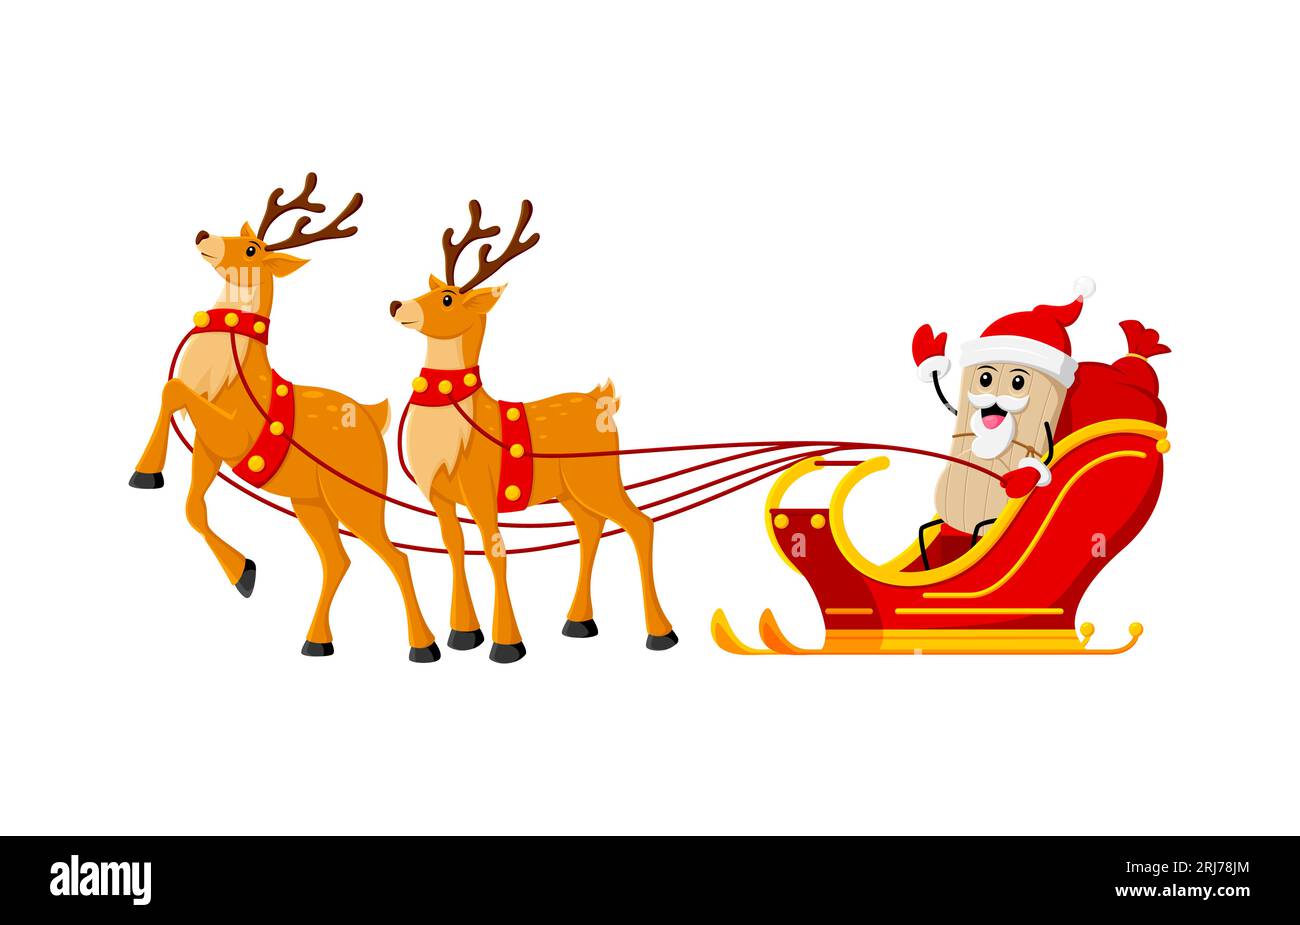 Cartoon Christmas tex mex tamales character in Santa costume joyfully rides a sleigh pulled by majestic reindeers, spreading holiday cheer with gifts. Isolated vector Mexican food Xmas personage Stock Vector